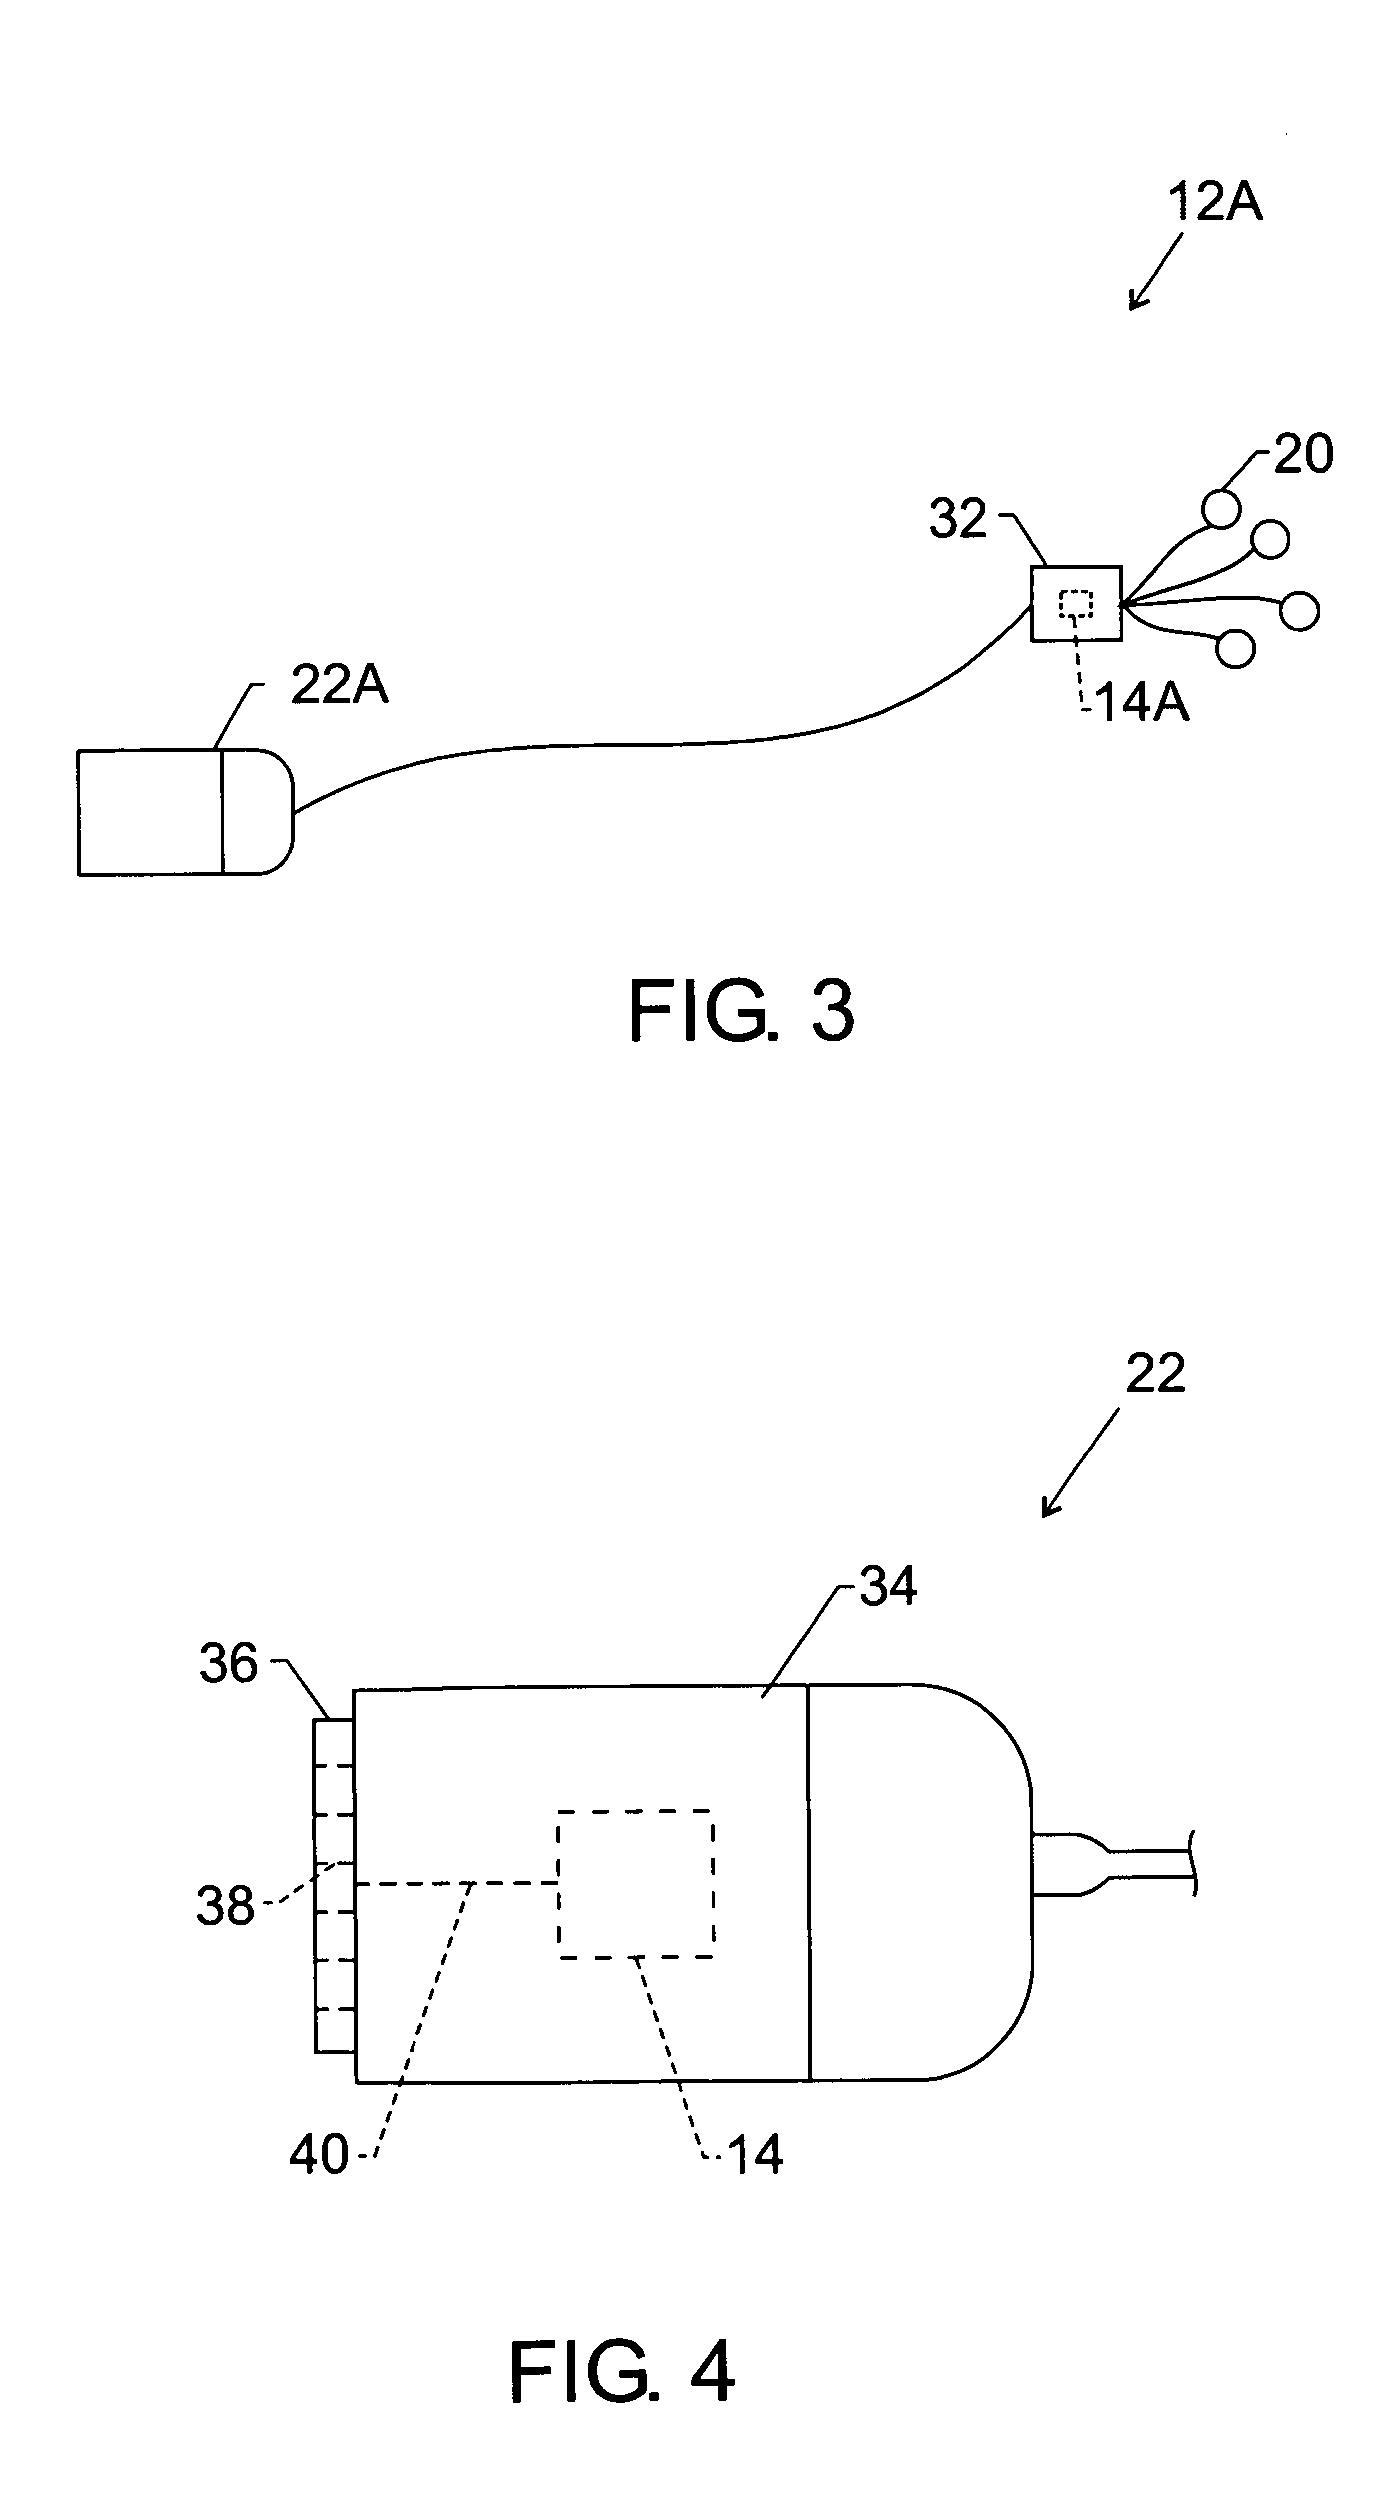 Patient monitoring system that incorporates memory into patient parameter cables